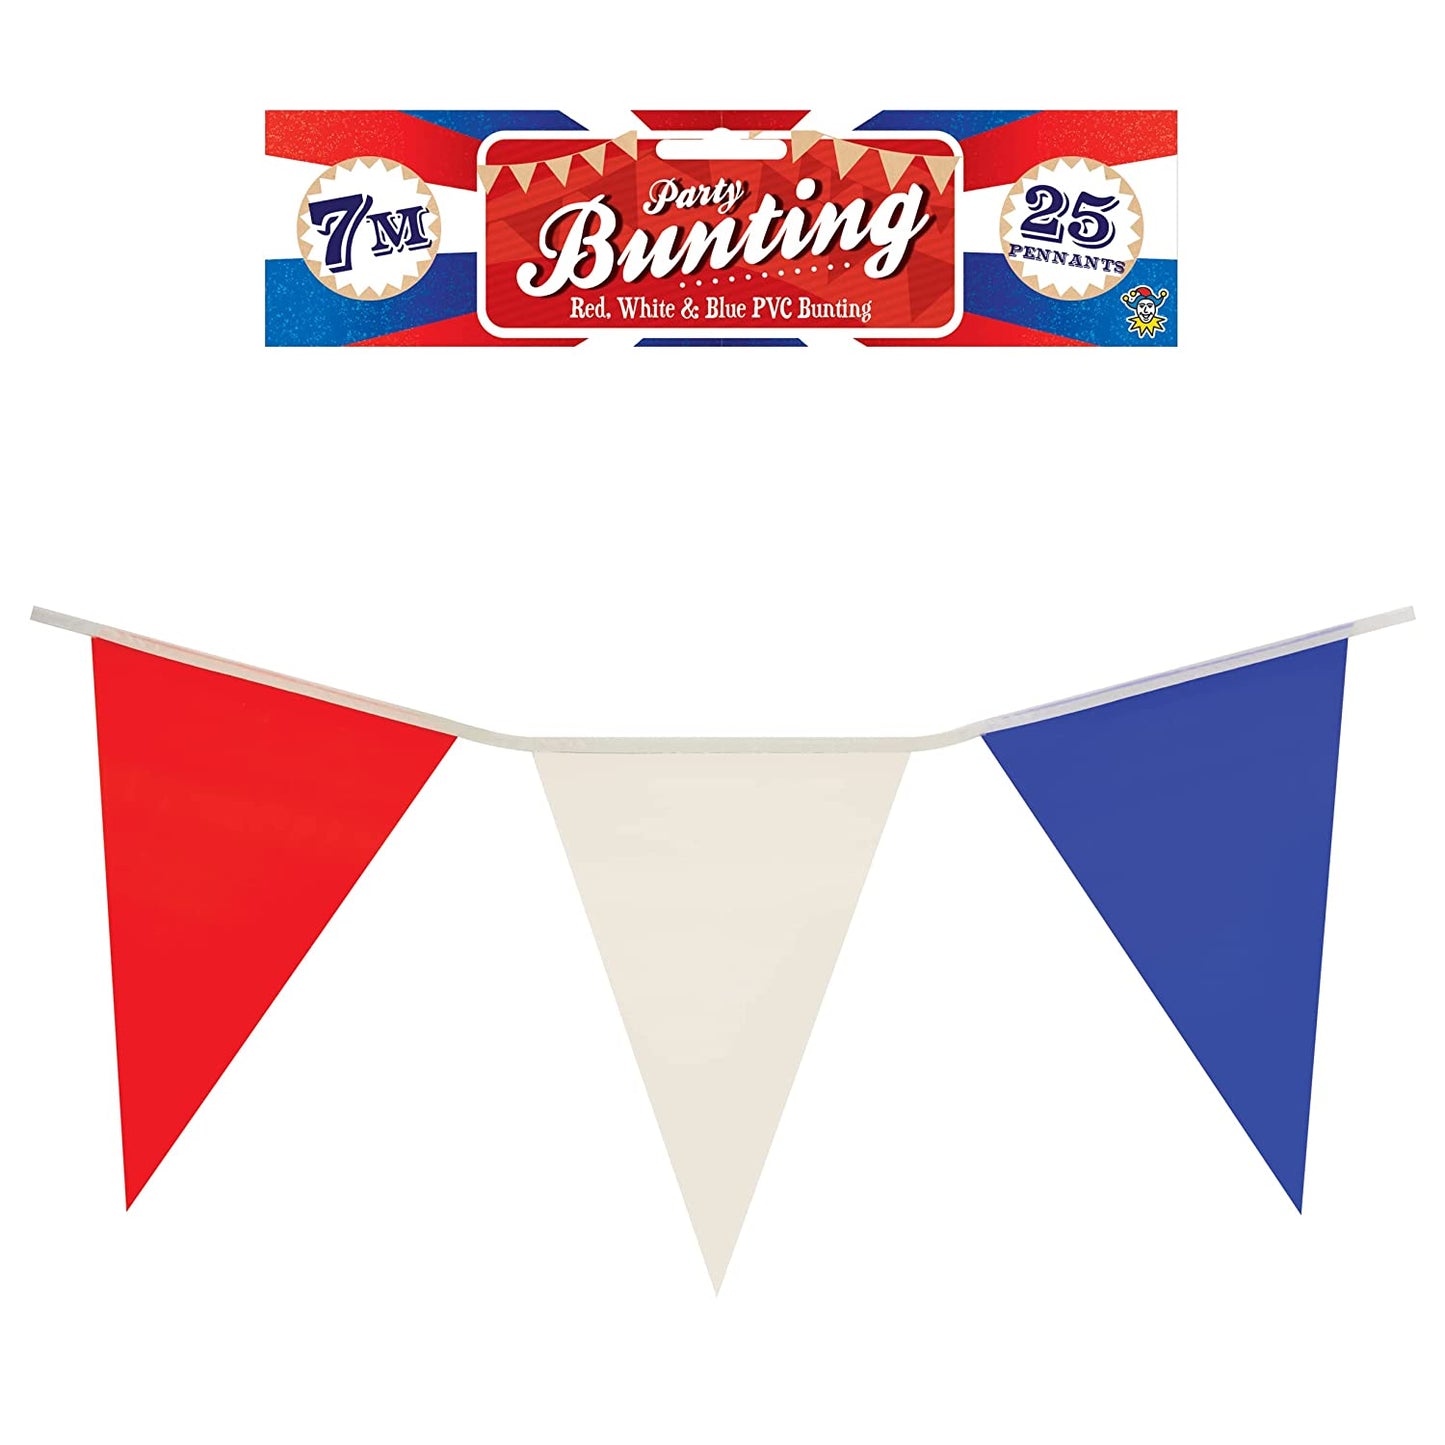 King's Coronation Party Bunting Red, White & Blue PVC Party Bunting 25 Pennants Flags 7m Long